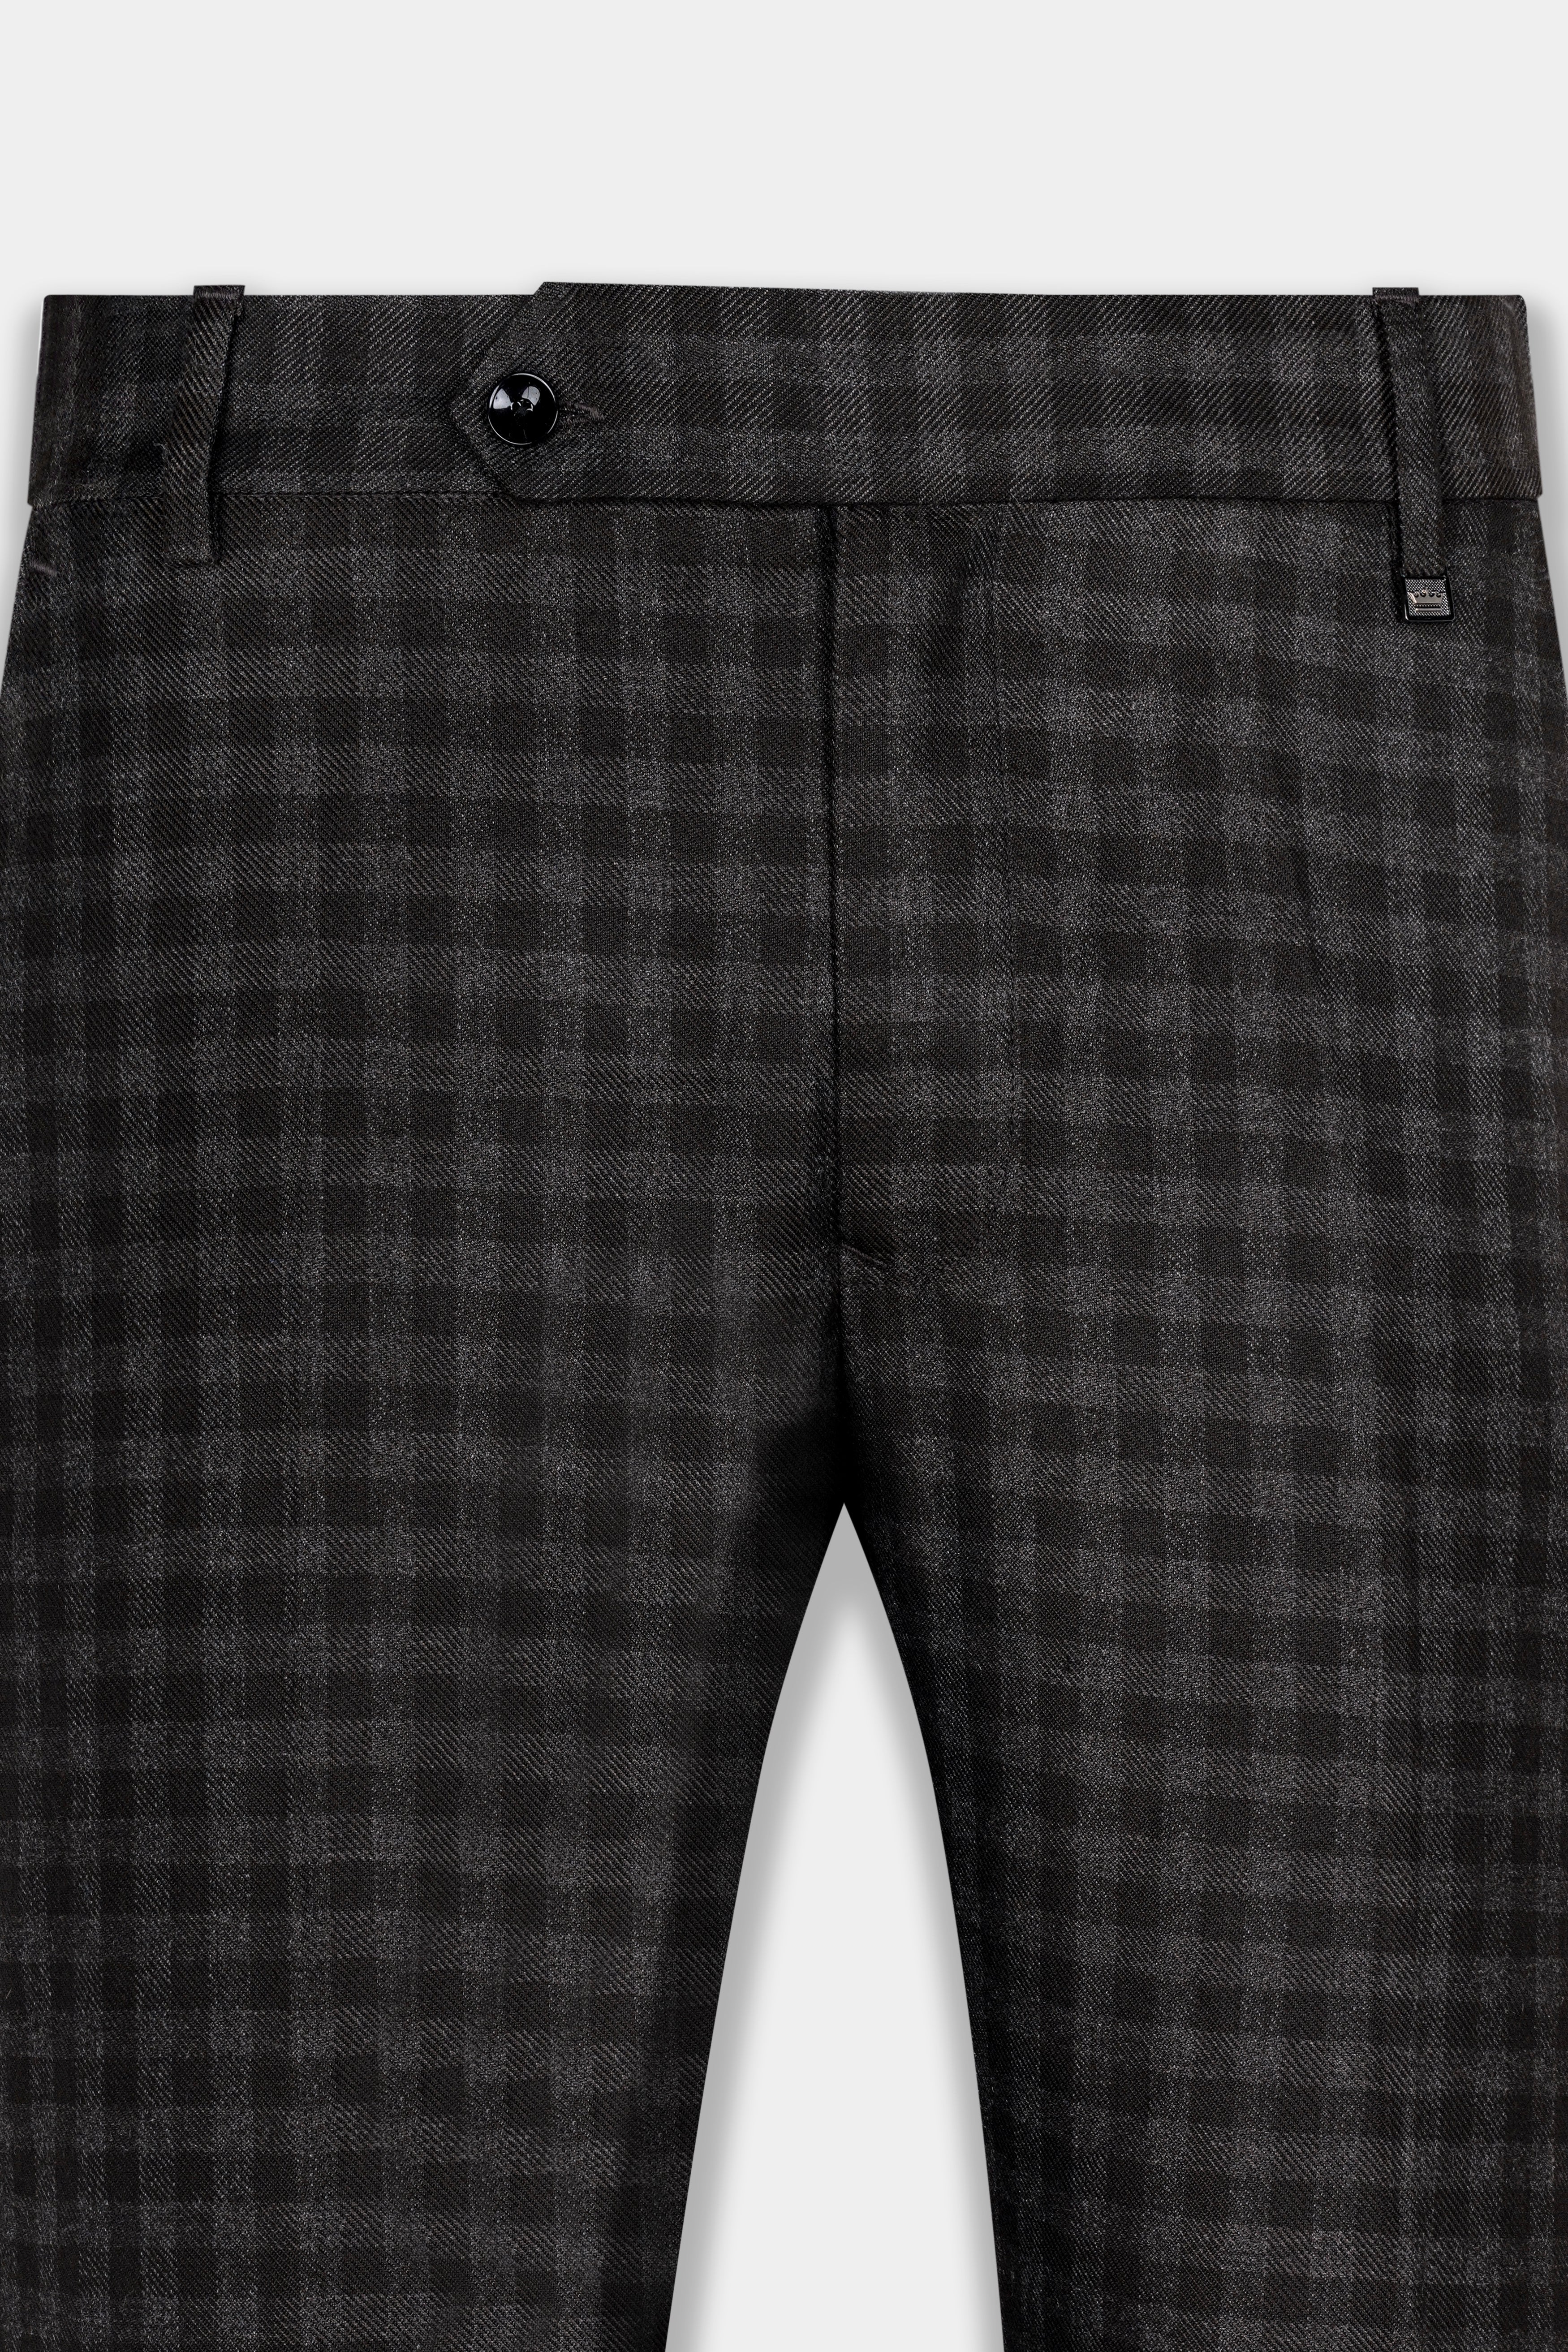 Jade Black and Storm Brown Checkered Wool Rich Double Breasted Suit